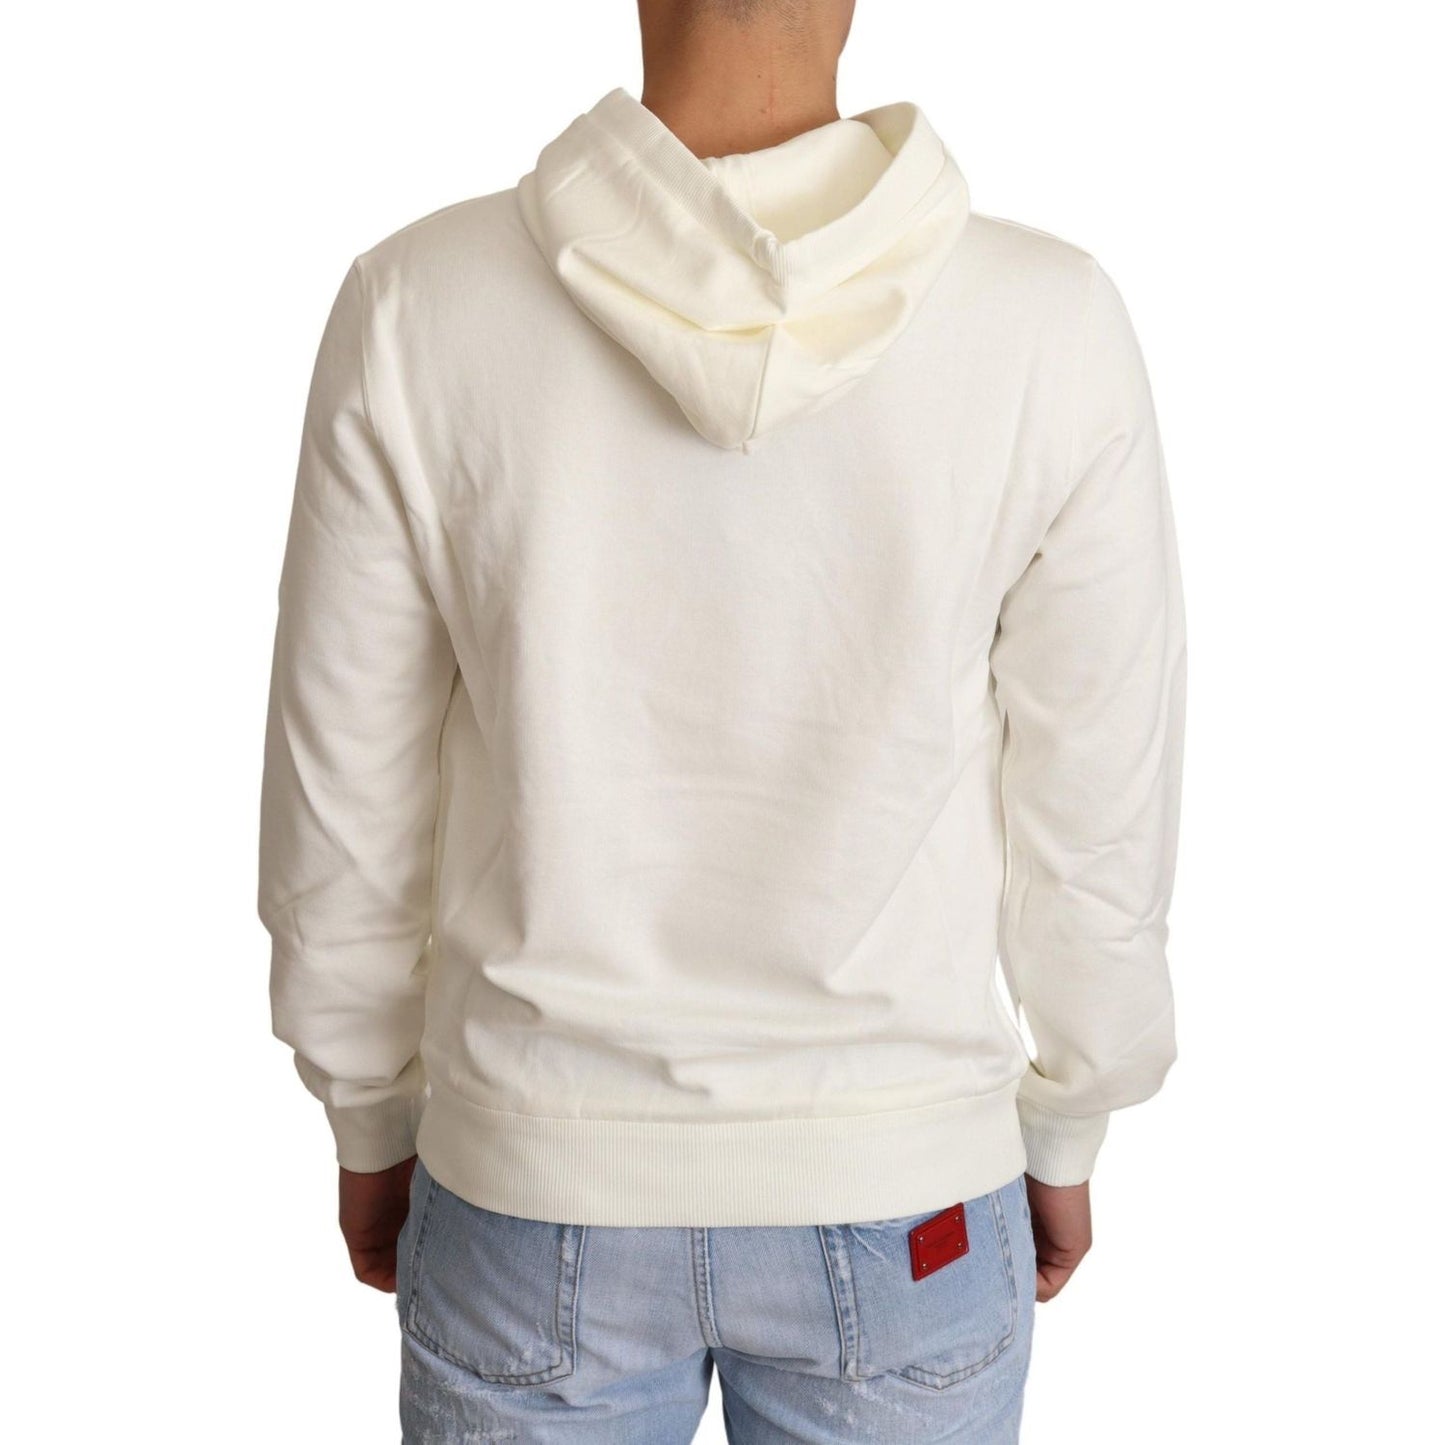 Dolce & Gabbana Regal King Motif Hooded Pullover Sweater white-king-ceasar-cotton-hooded-sweater IMG_9966-scaled-8fcd0766-c46.jpg